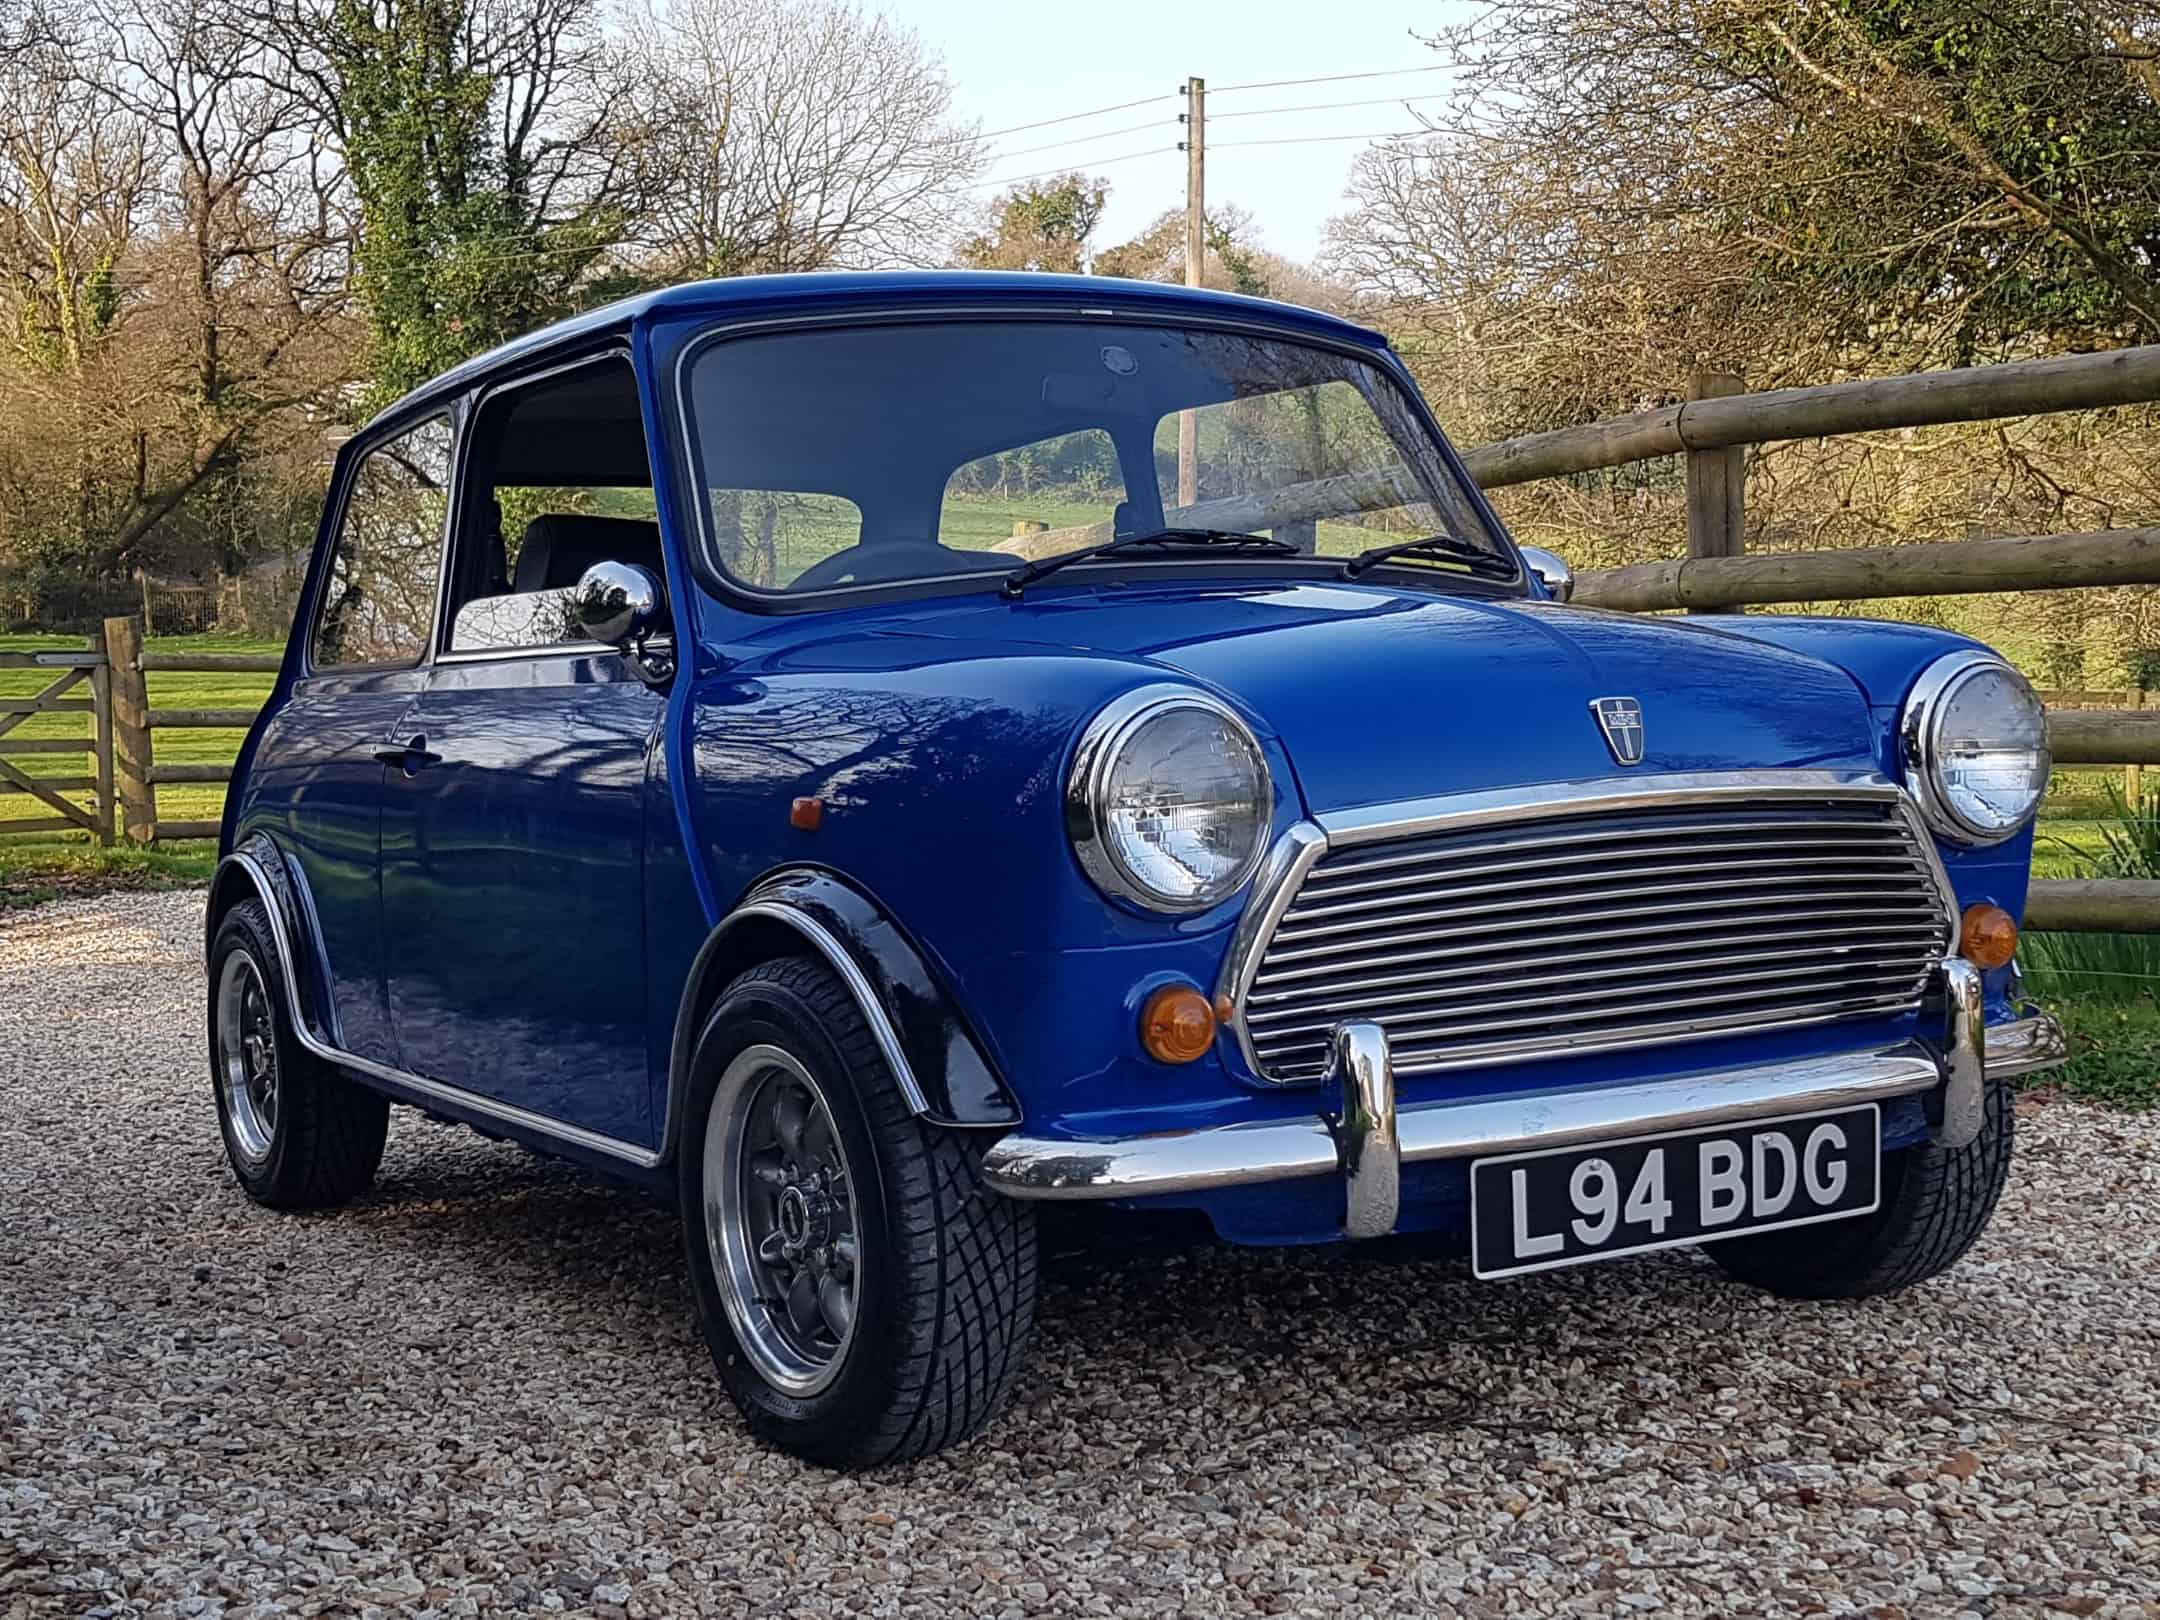 ** NOW SOLD ** 1994 Rover Mini Sprite 1275 CC On Just 28300 Miles In 29 Years!!